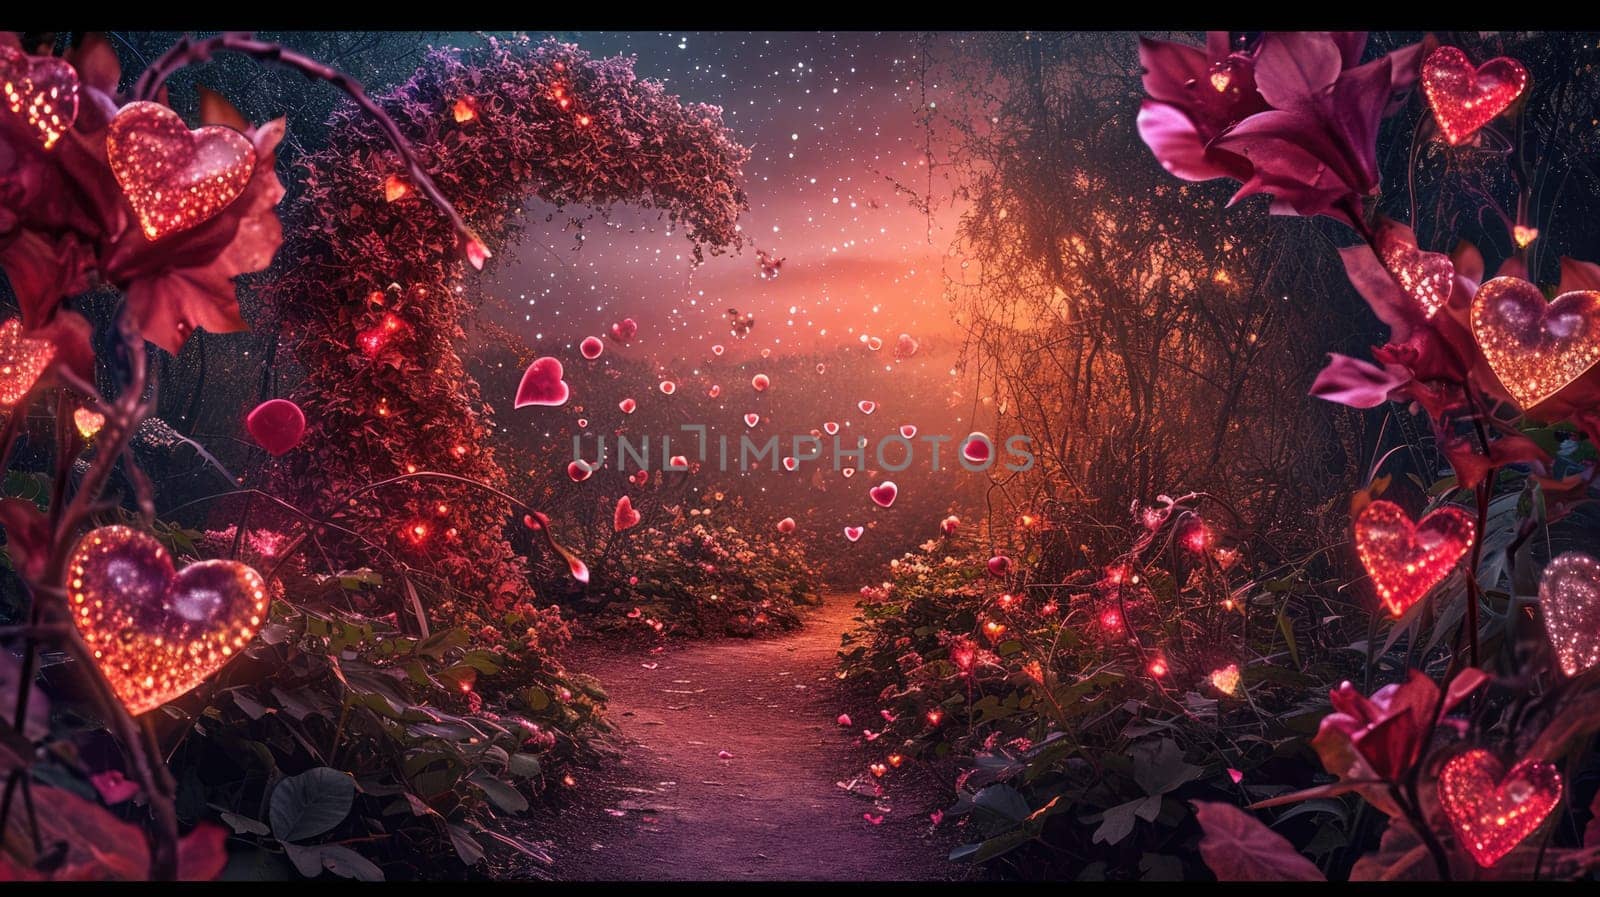 enchanted love forest in valentines day pragma by biancoblue